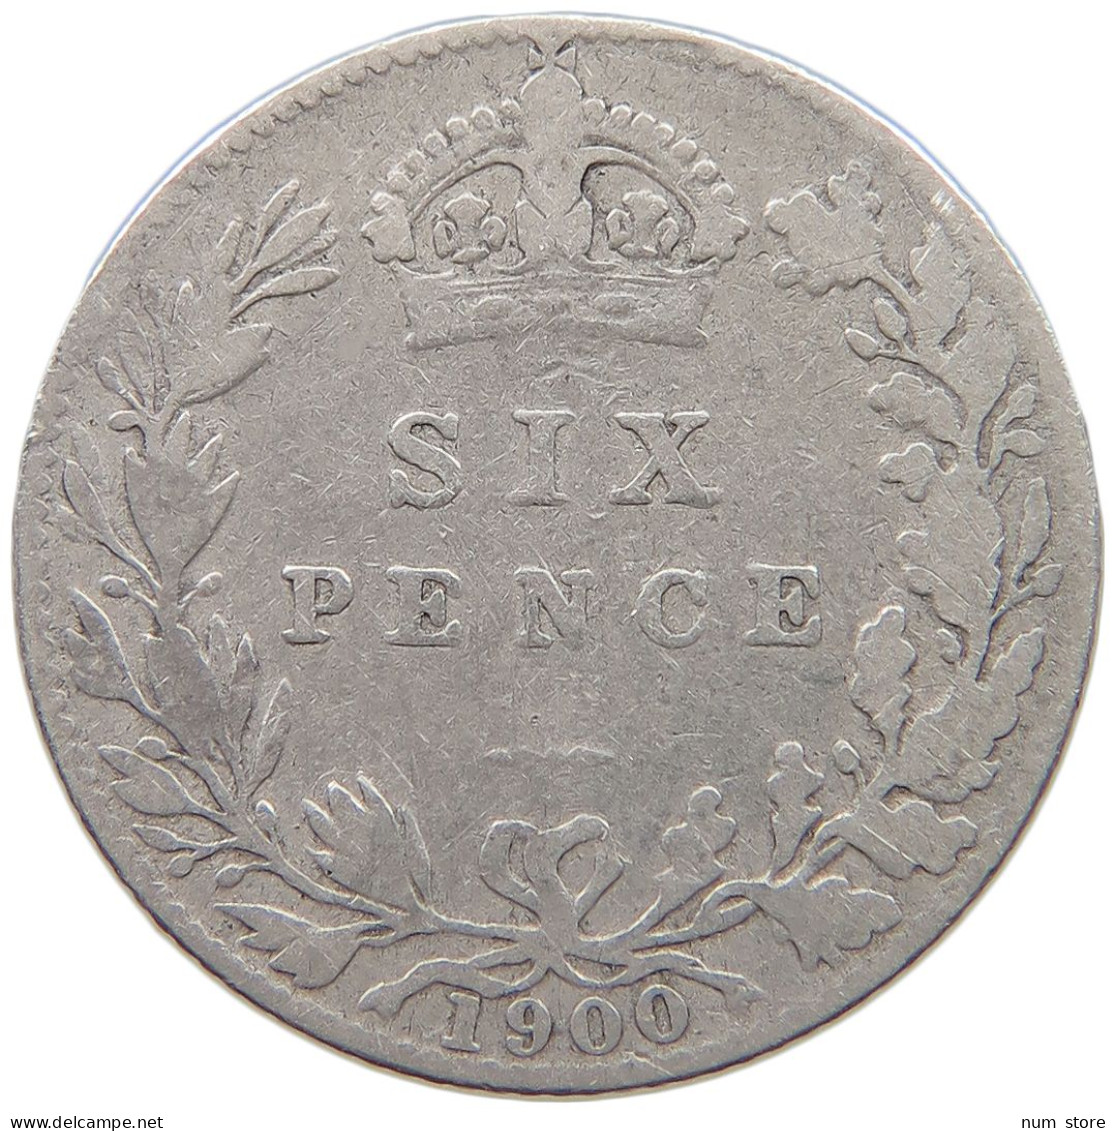 GREAT BRITAIN 6 SIXPENCE 1900 VICTORIA 1837-1901 #MA 026011 - H. 6 Pence